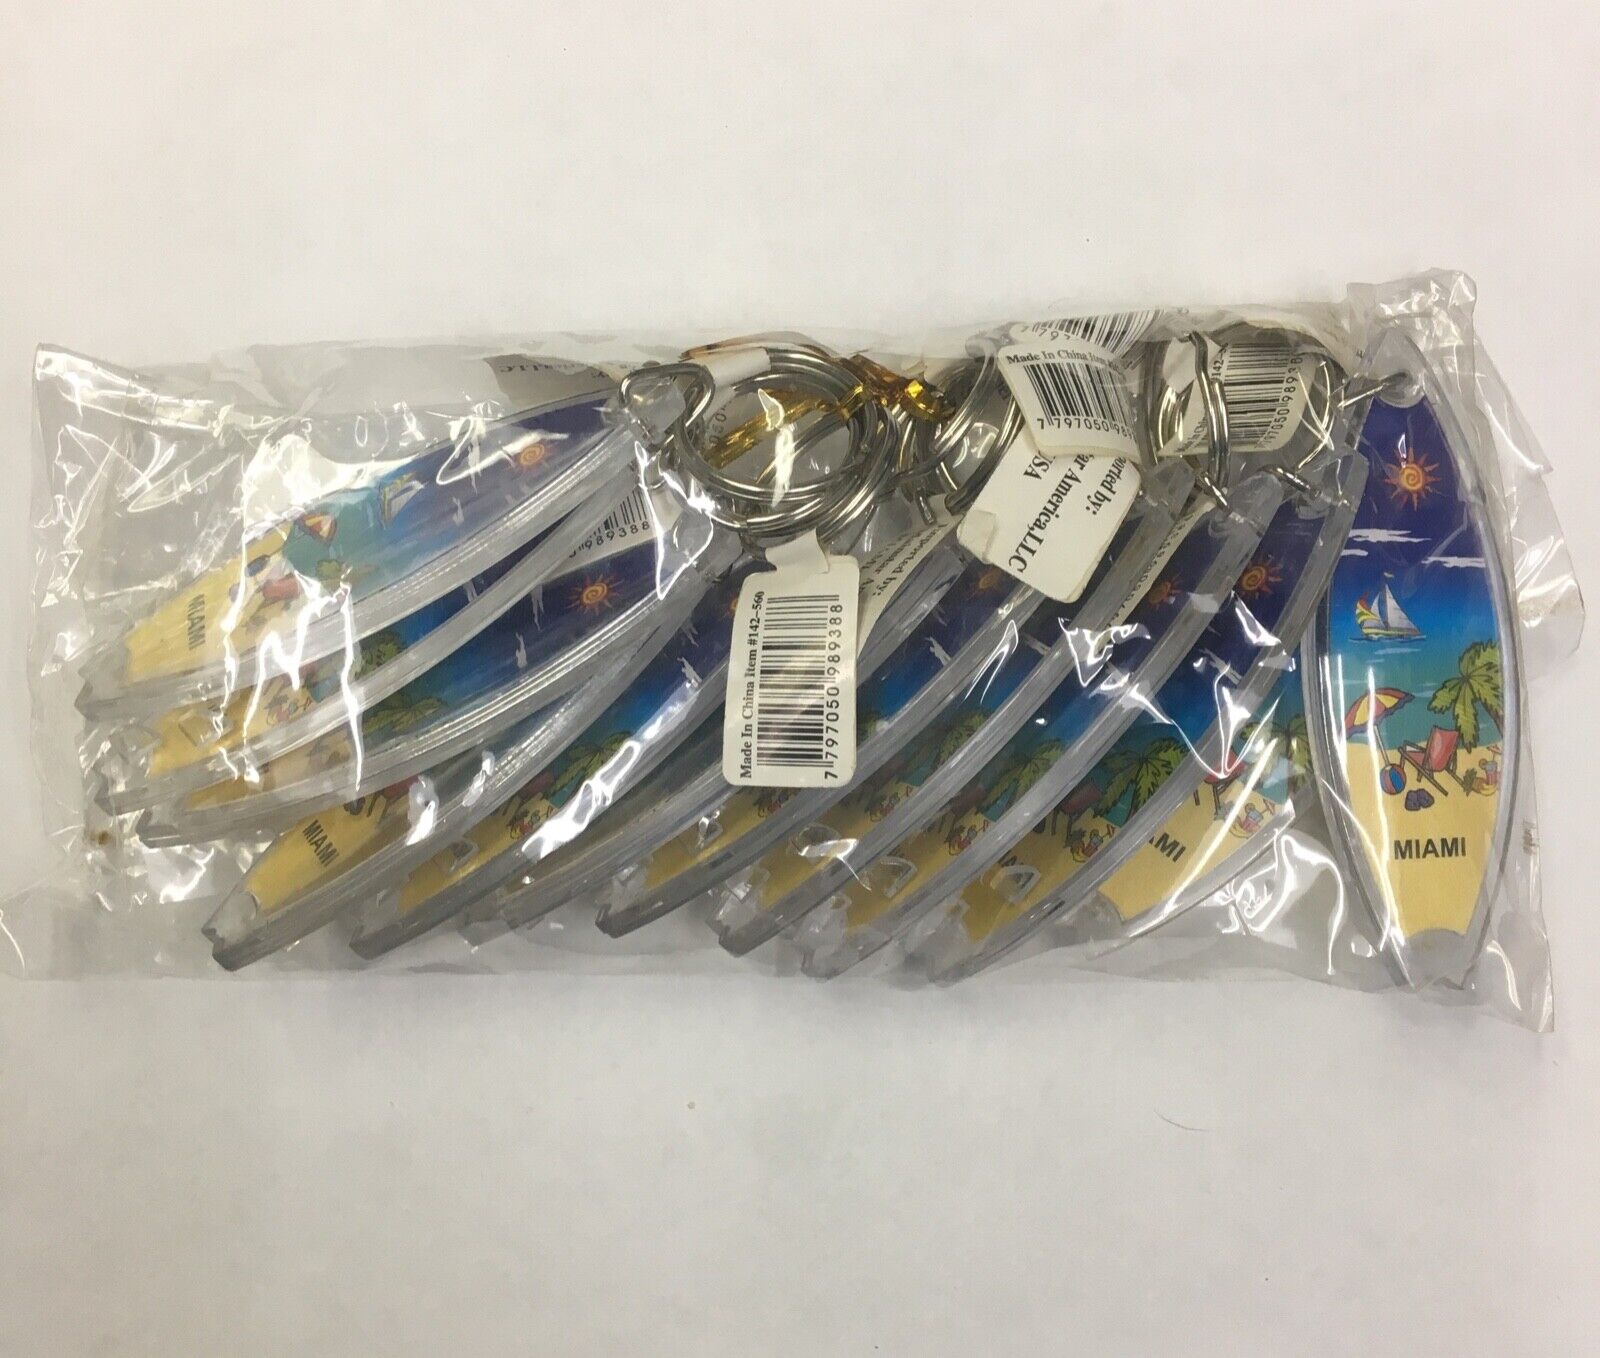 12 Pieces  Miami Souvenir Keychain Plastic Double Sided New, Great Gift